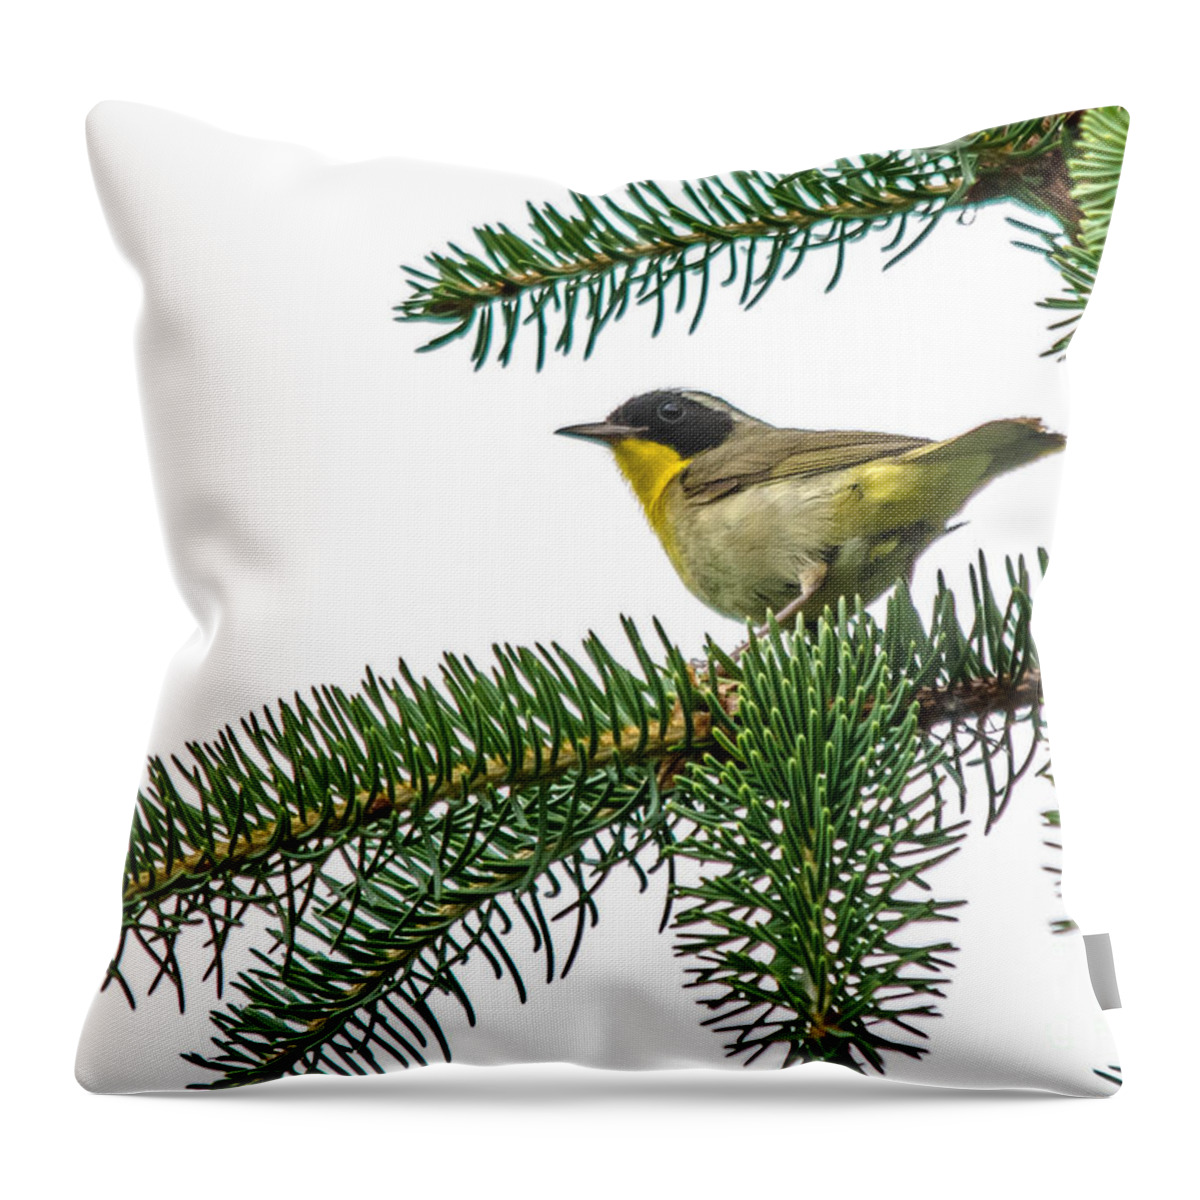 Beautiful Throw Pillow featuring the photograph Masked Warbler by Cheryl Baxter